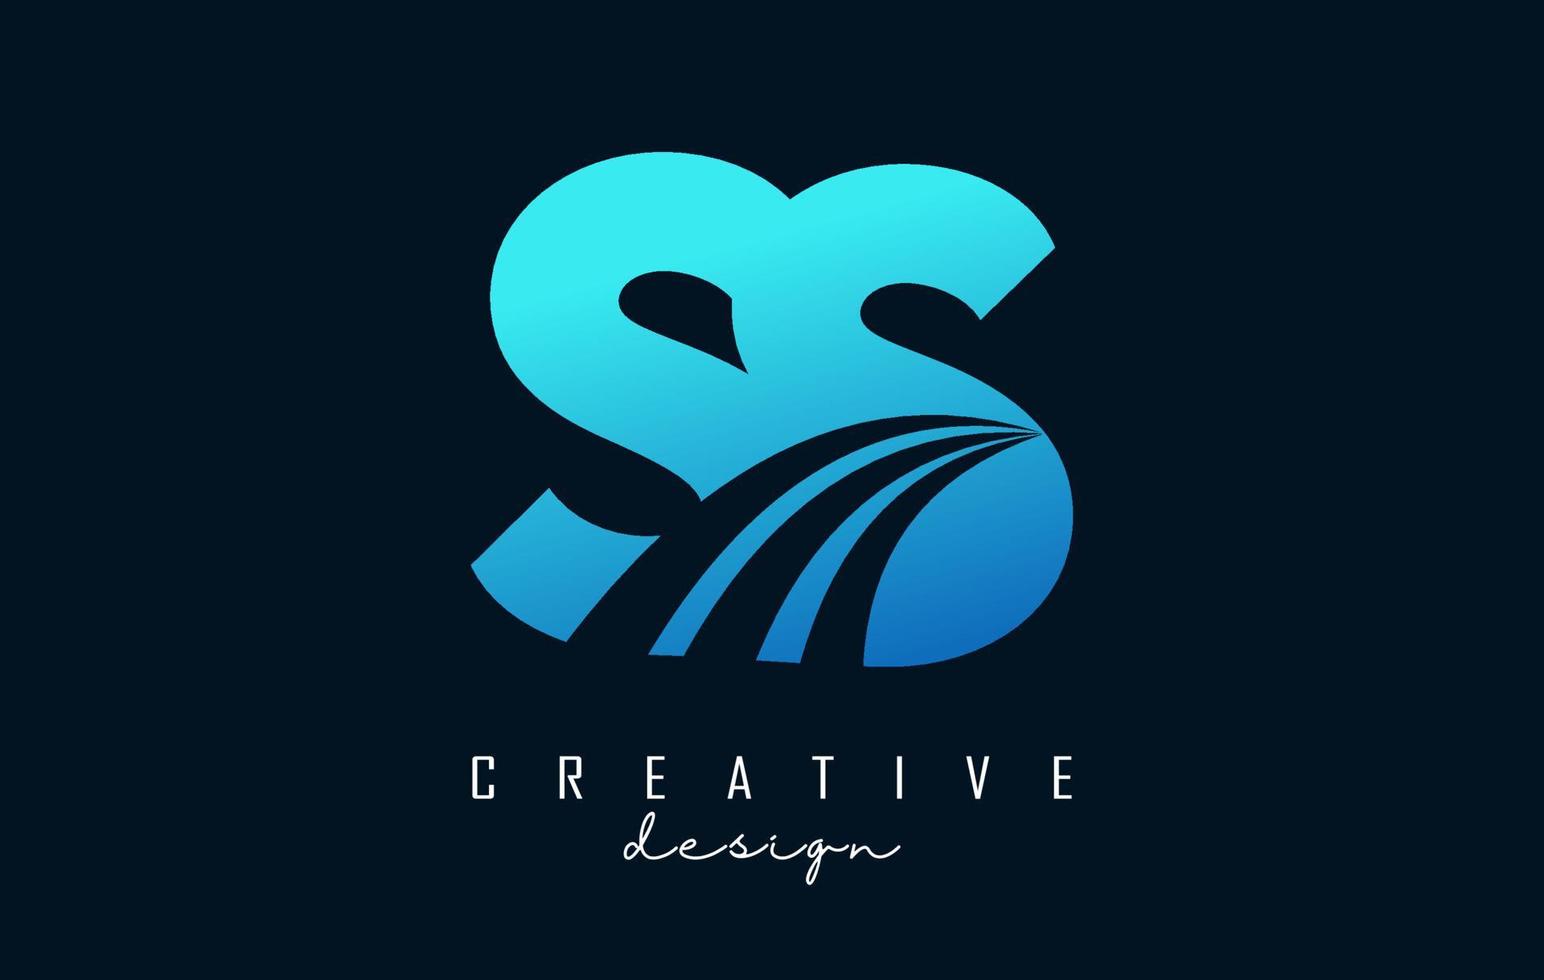 Creative blue letters Ss s logo with leading lines and road concept design. Letters with geometric design. vector